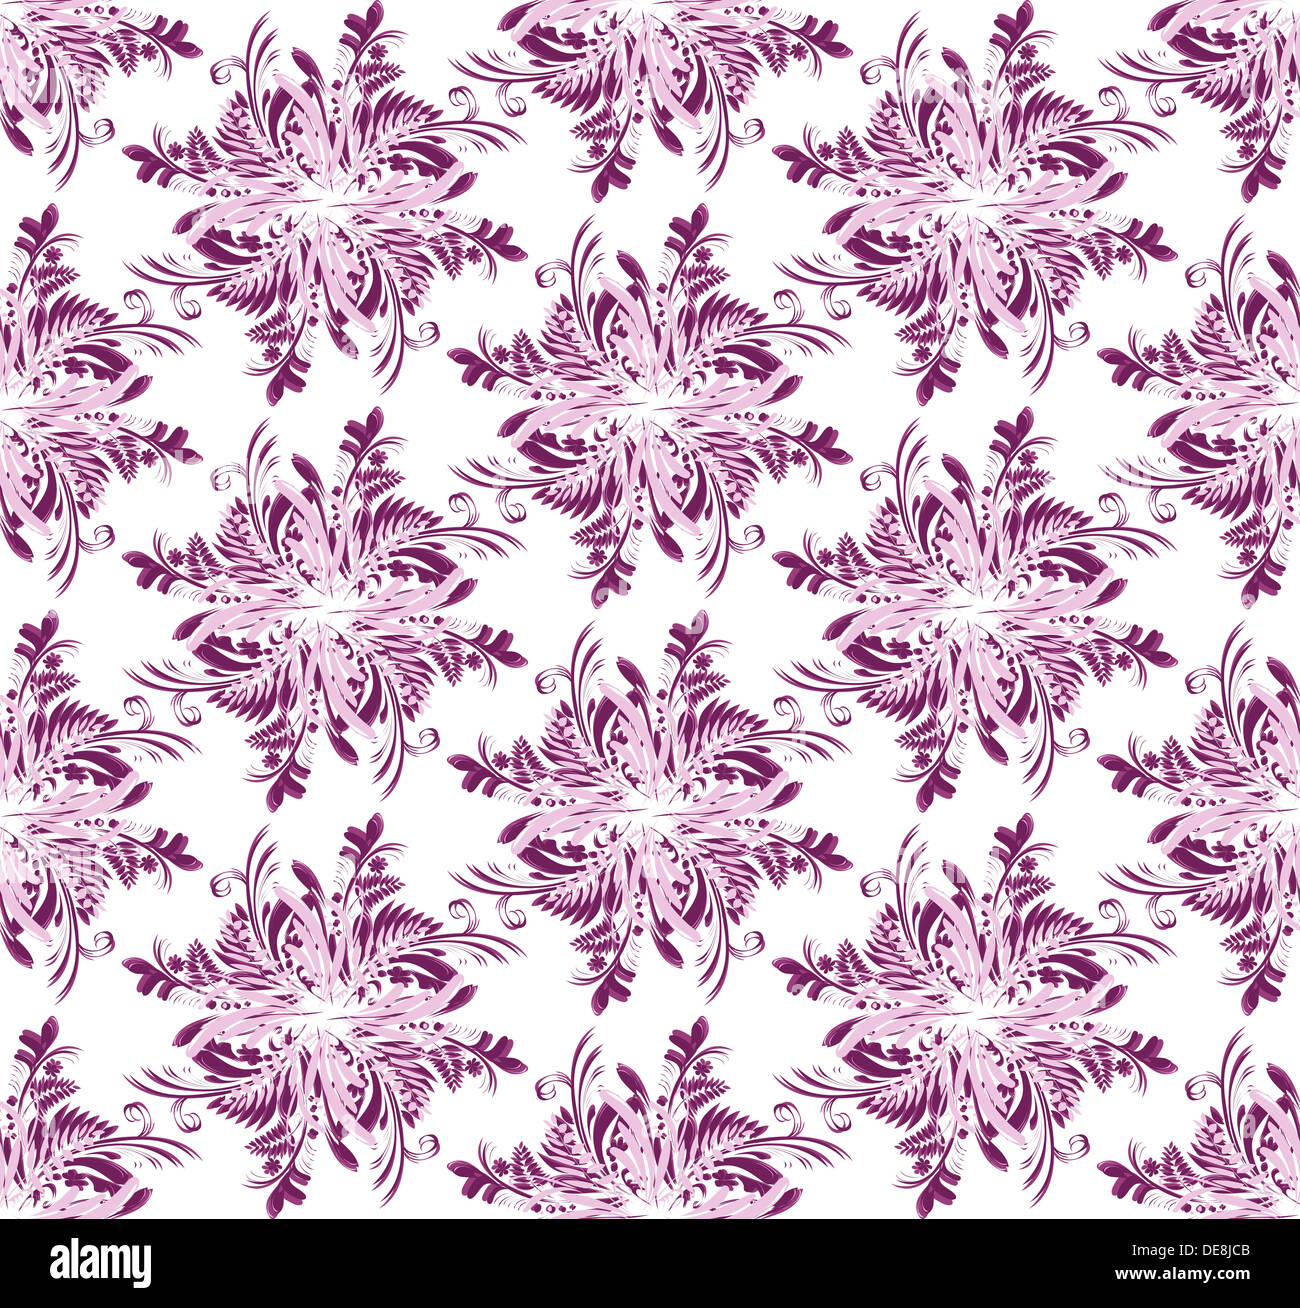 abstract seamless floral scroll patterns rhombus background raster illustration Stock Photo